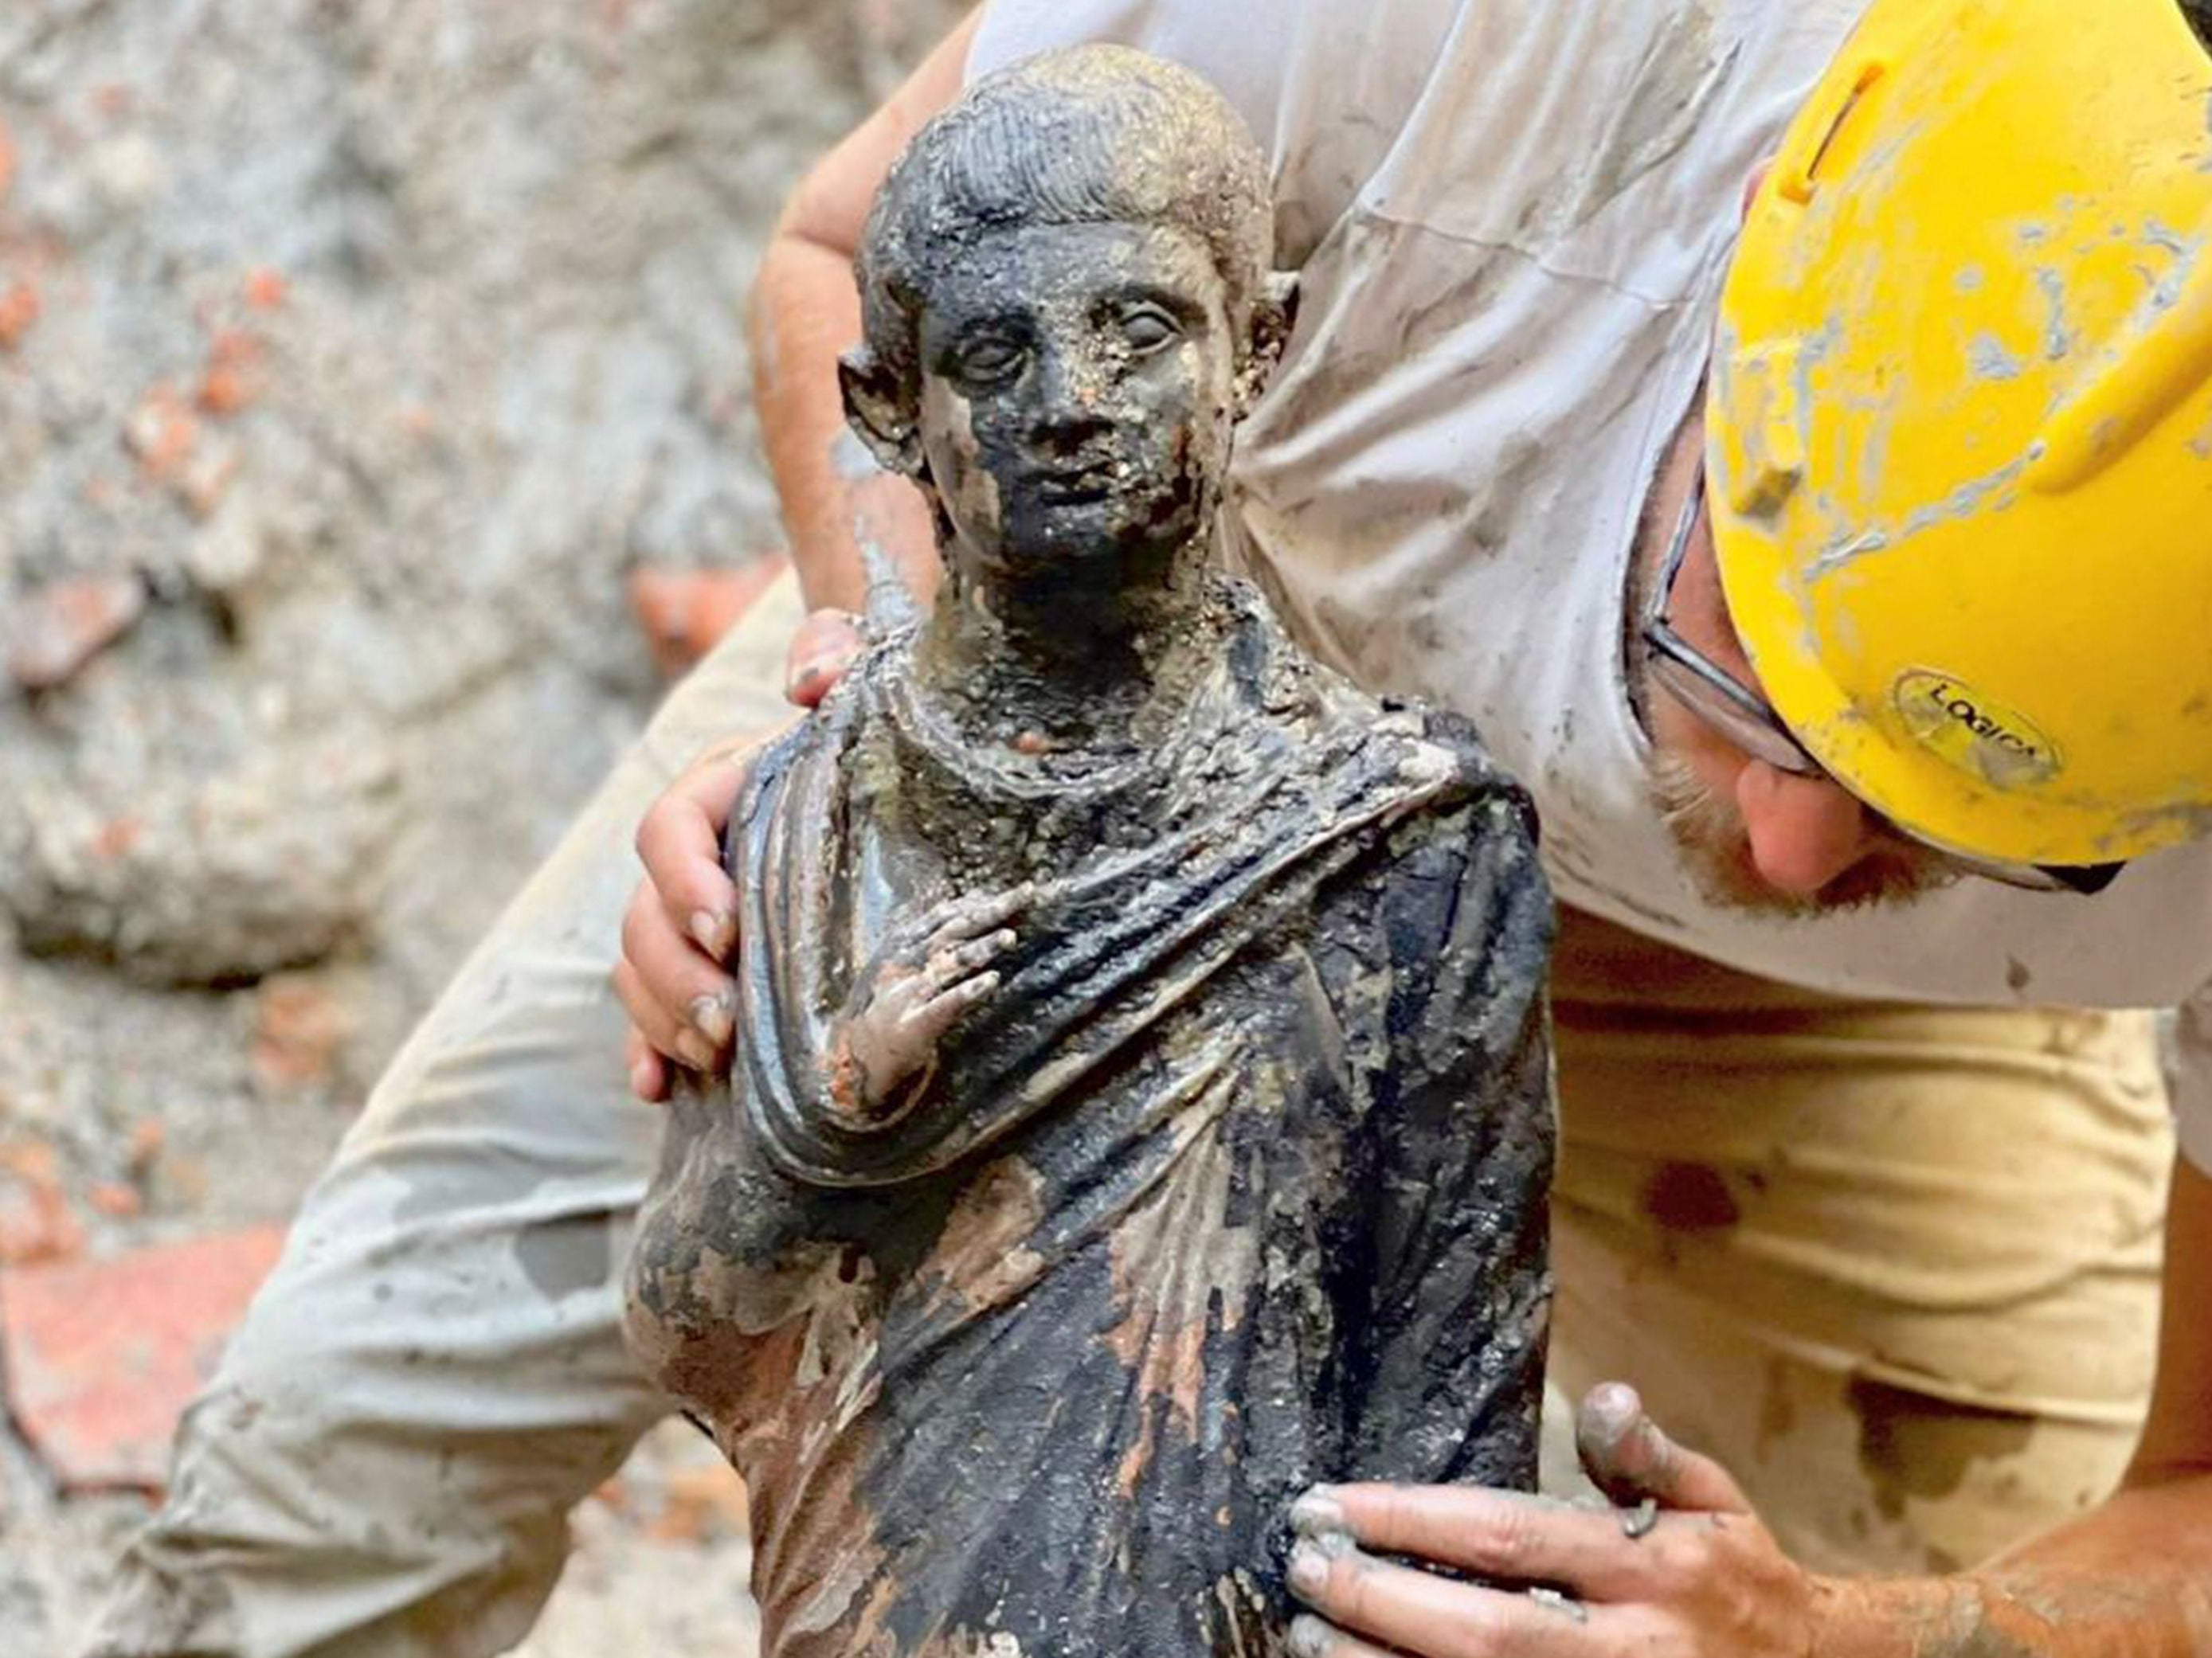 More than 20 statues have been preserved under the mud in hotsprings